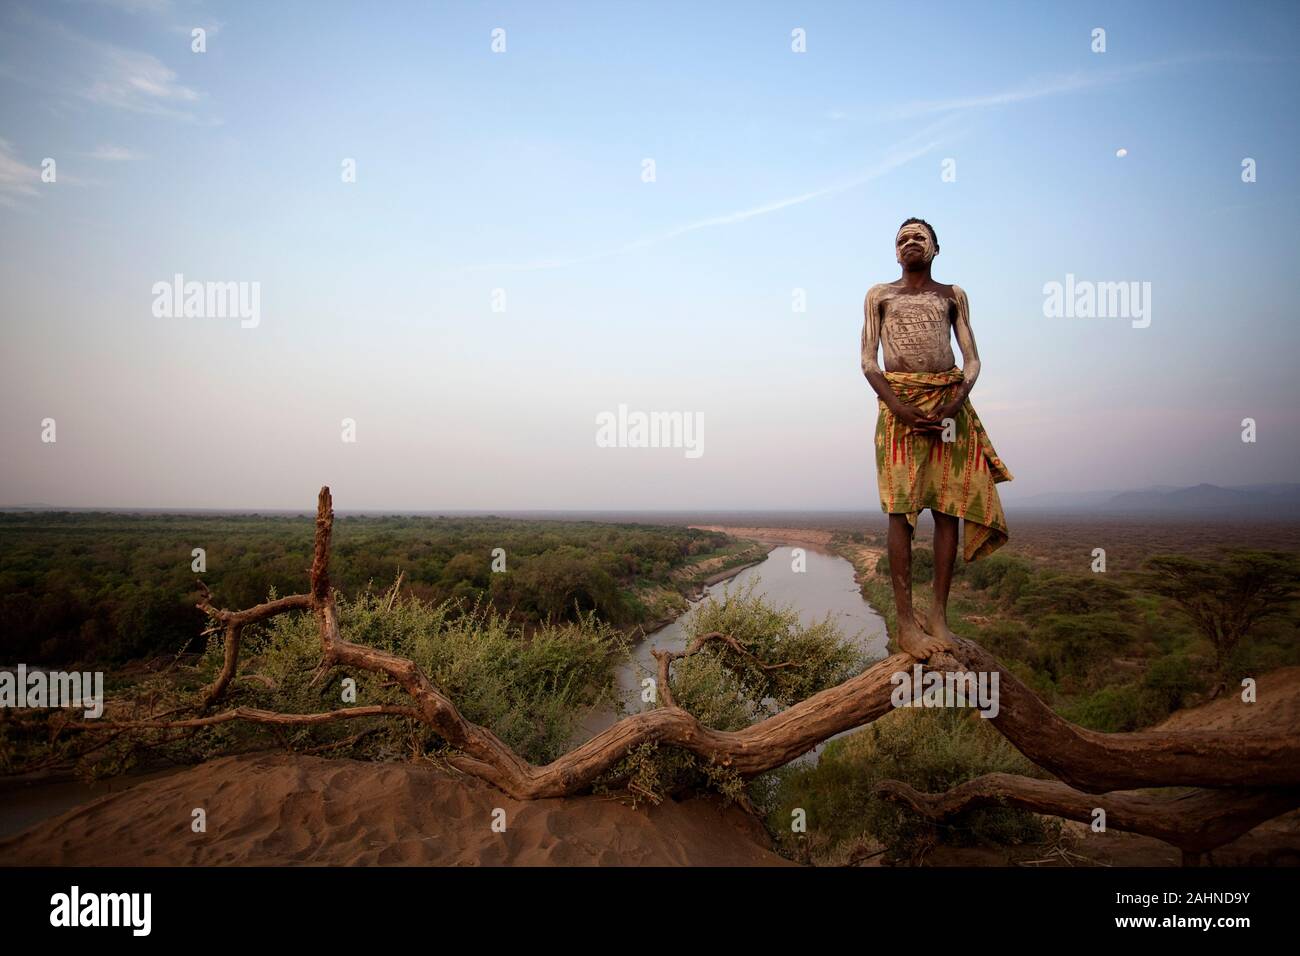 Karo tribe, Young tribal Karo boy with traditionally painted face standing on a branch above the omo river, Omo valley, Ethiopia, Africa Stock Photo